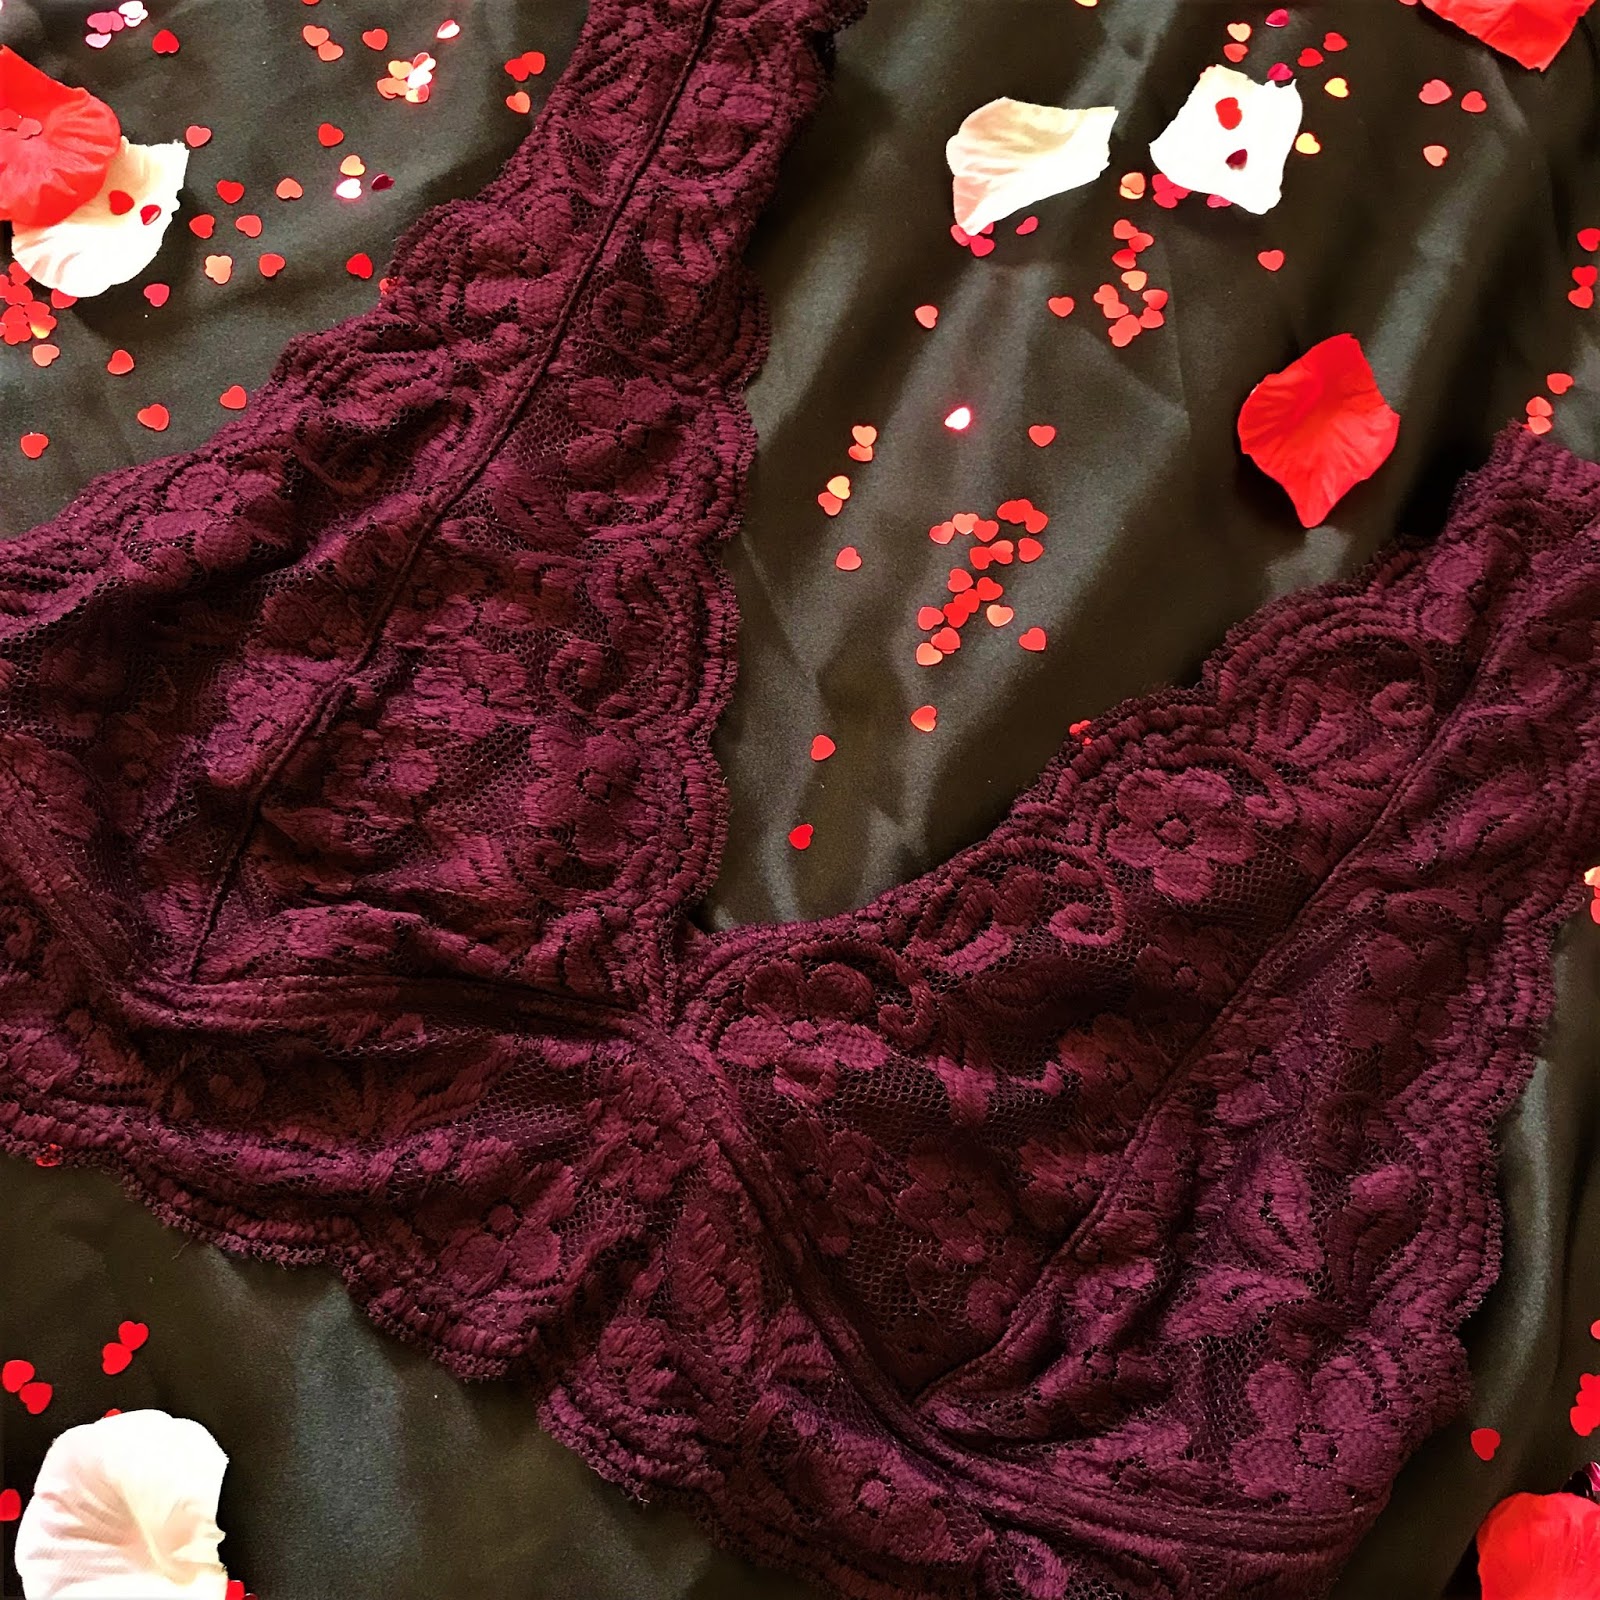 Affordable SHEIN Valentines Lingerie Haul ❤ - ○ Laura Thornberry ○  Lifestyle Blogger ○ London Based ○